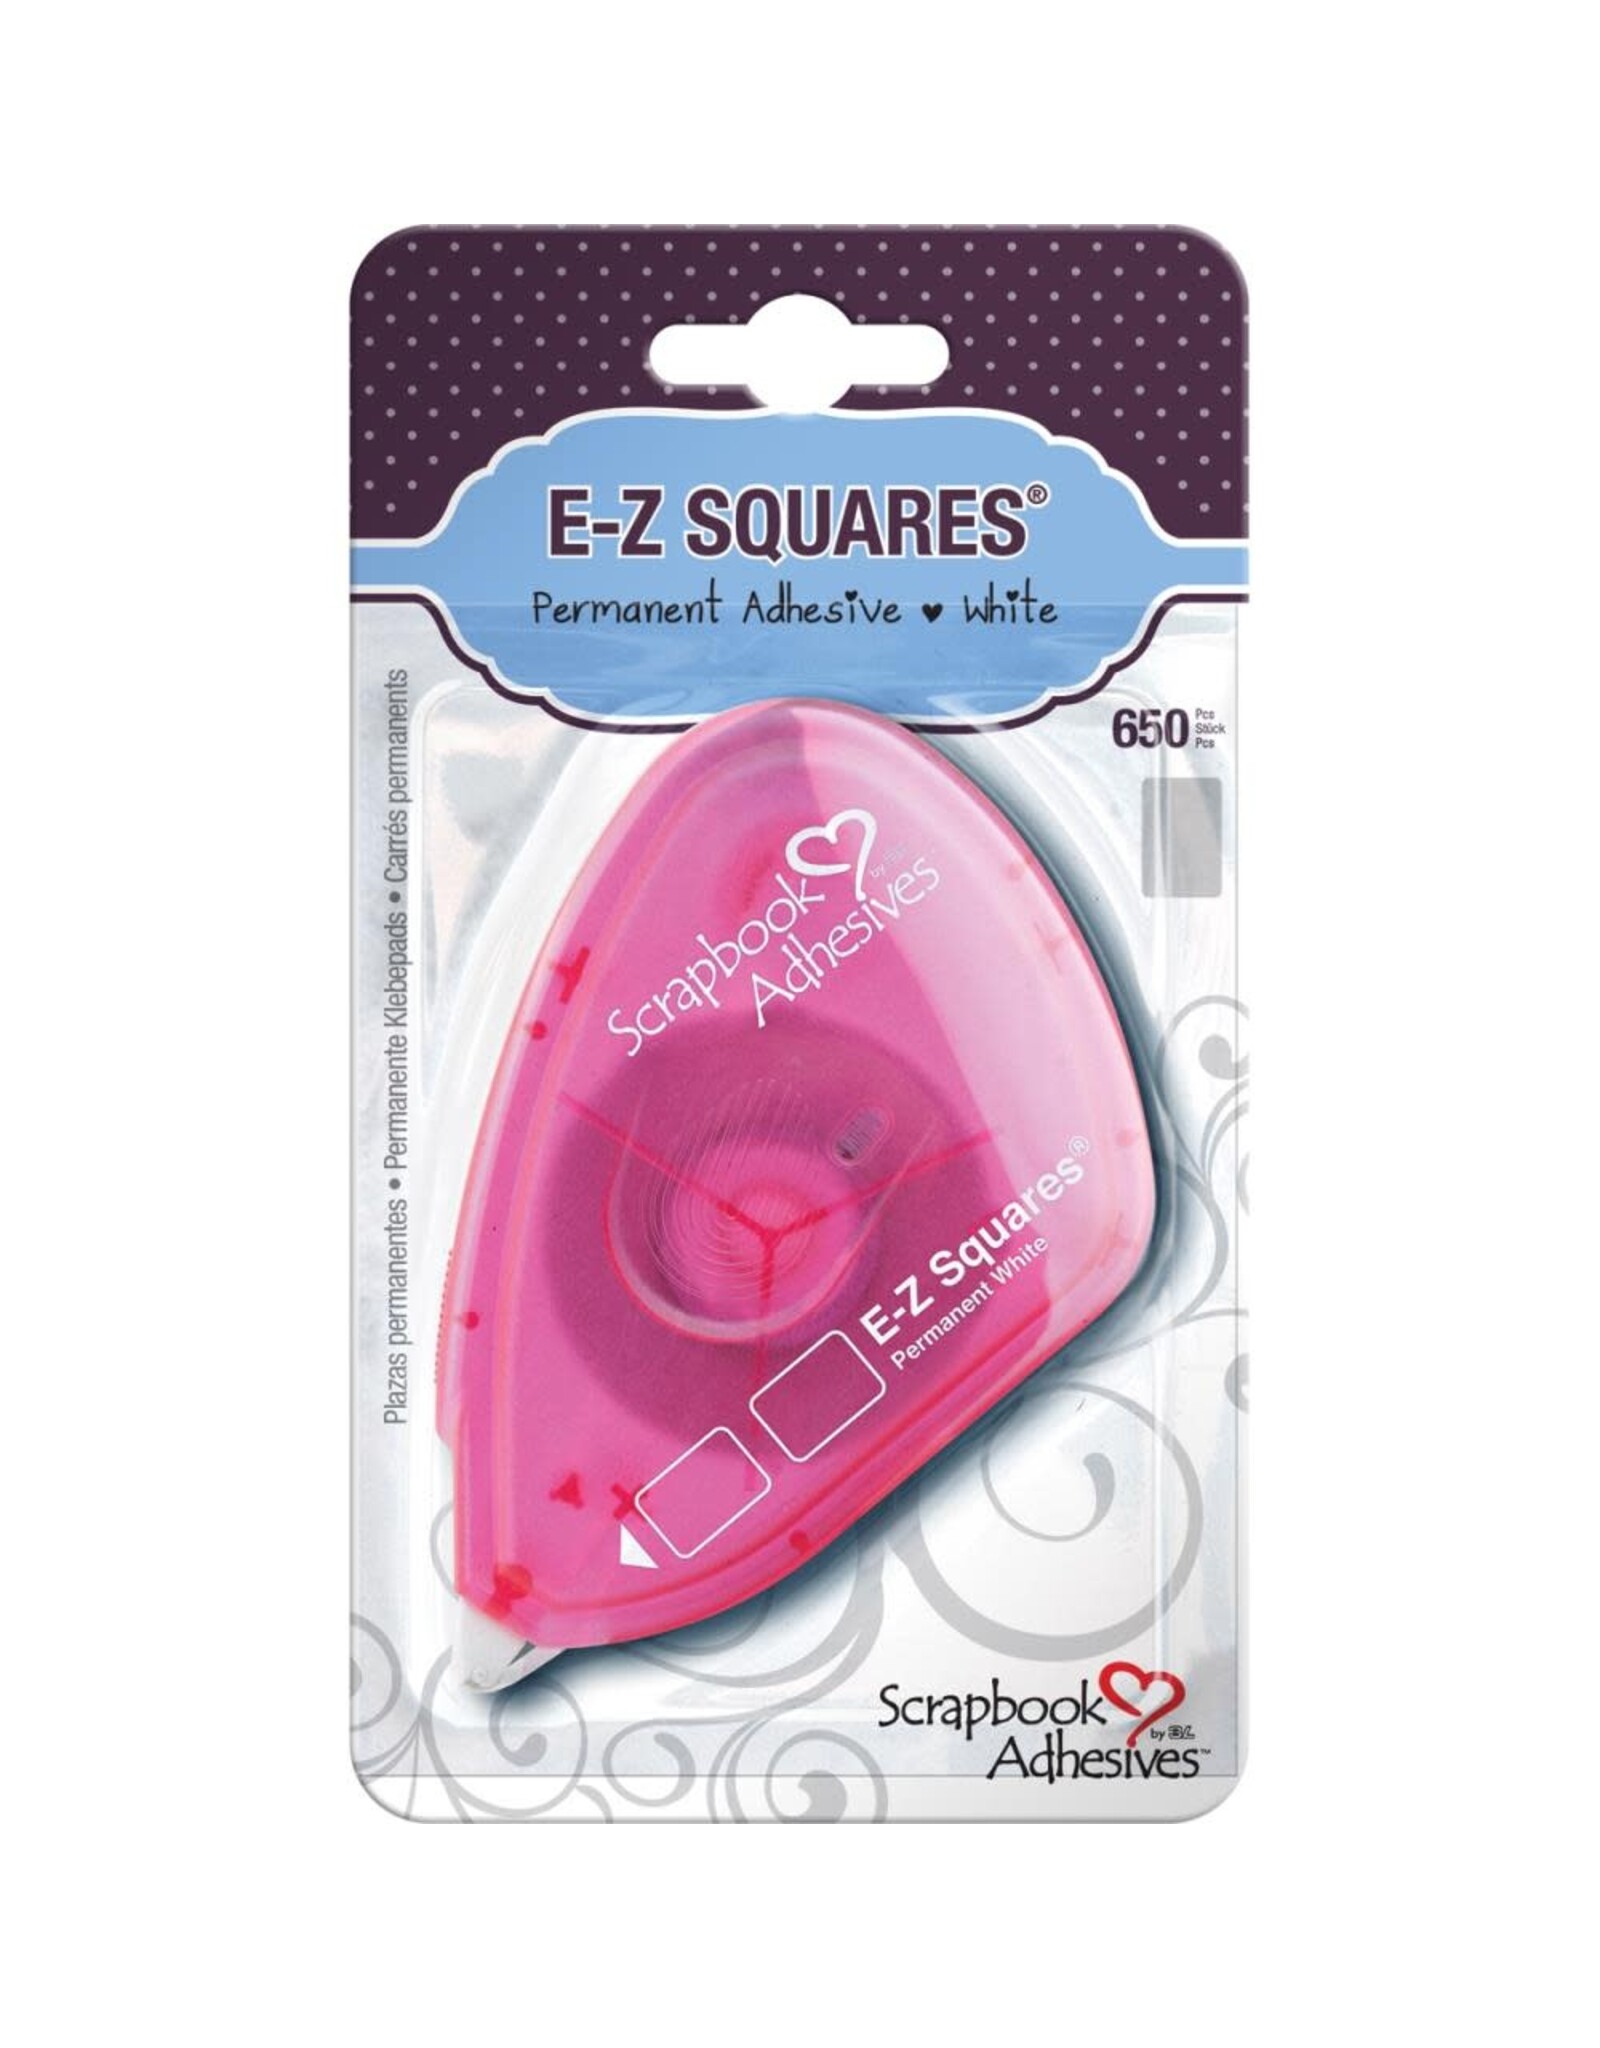 Scrapbook Adhesives E-Z White Squares-small pink